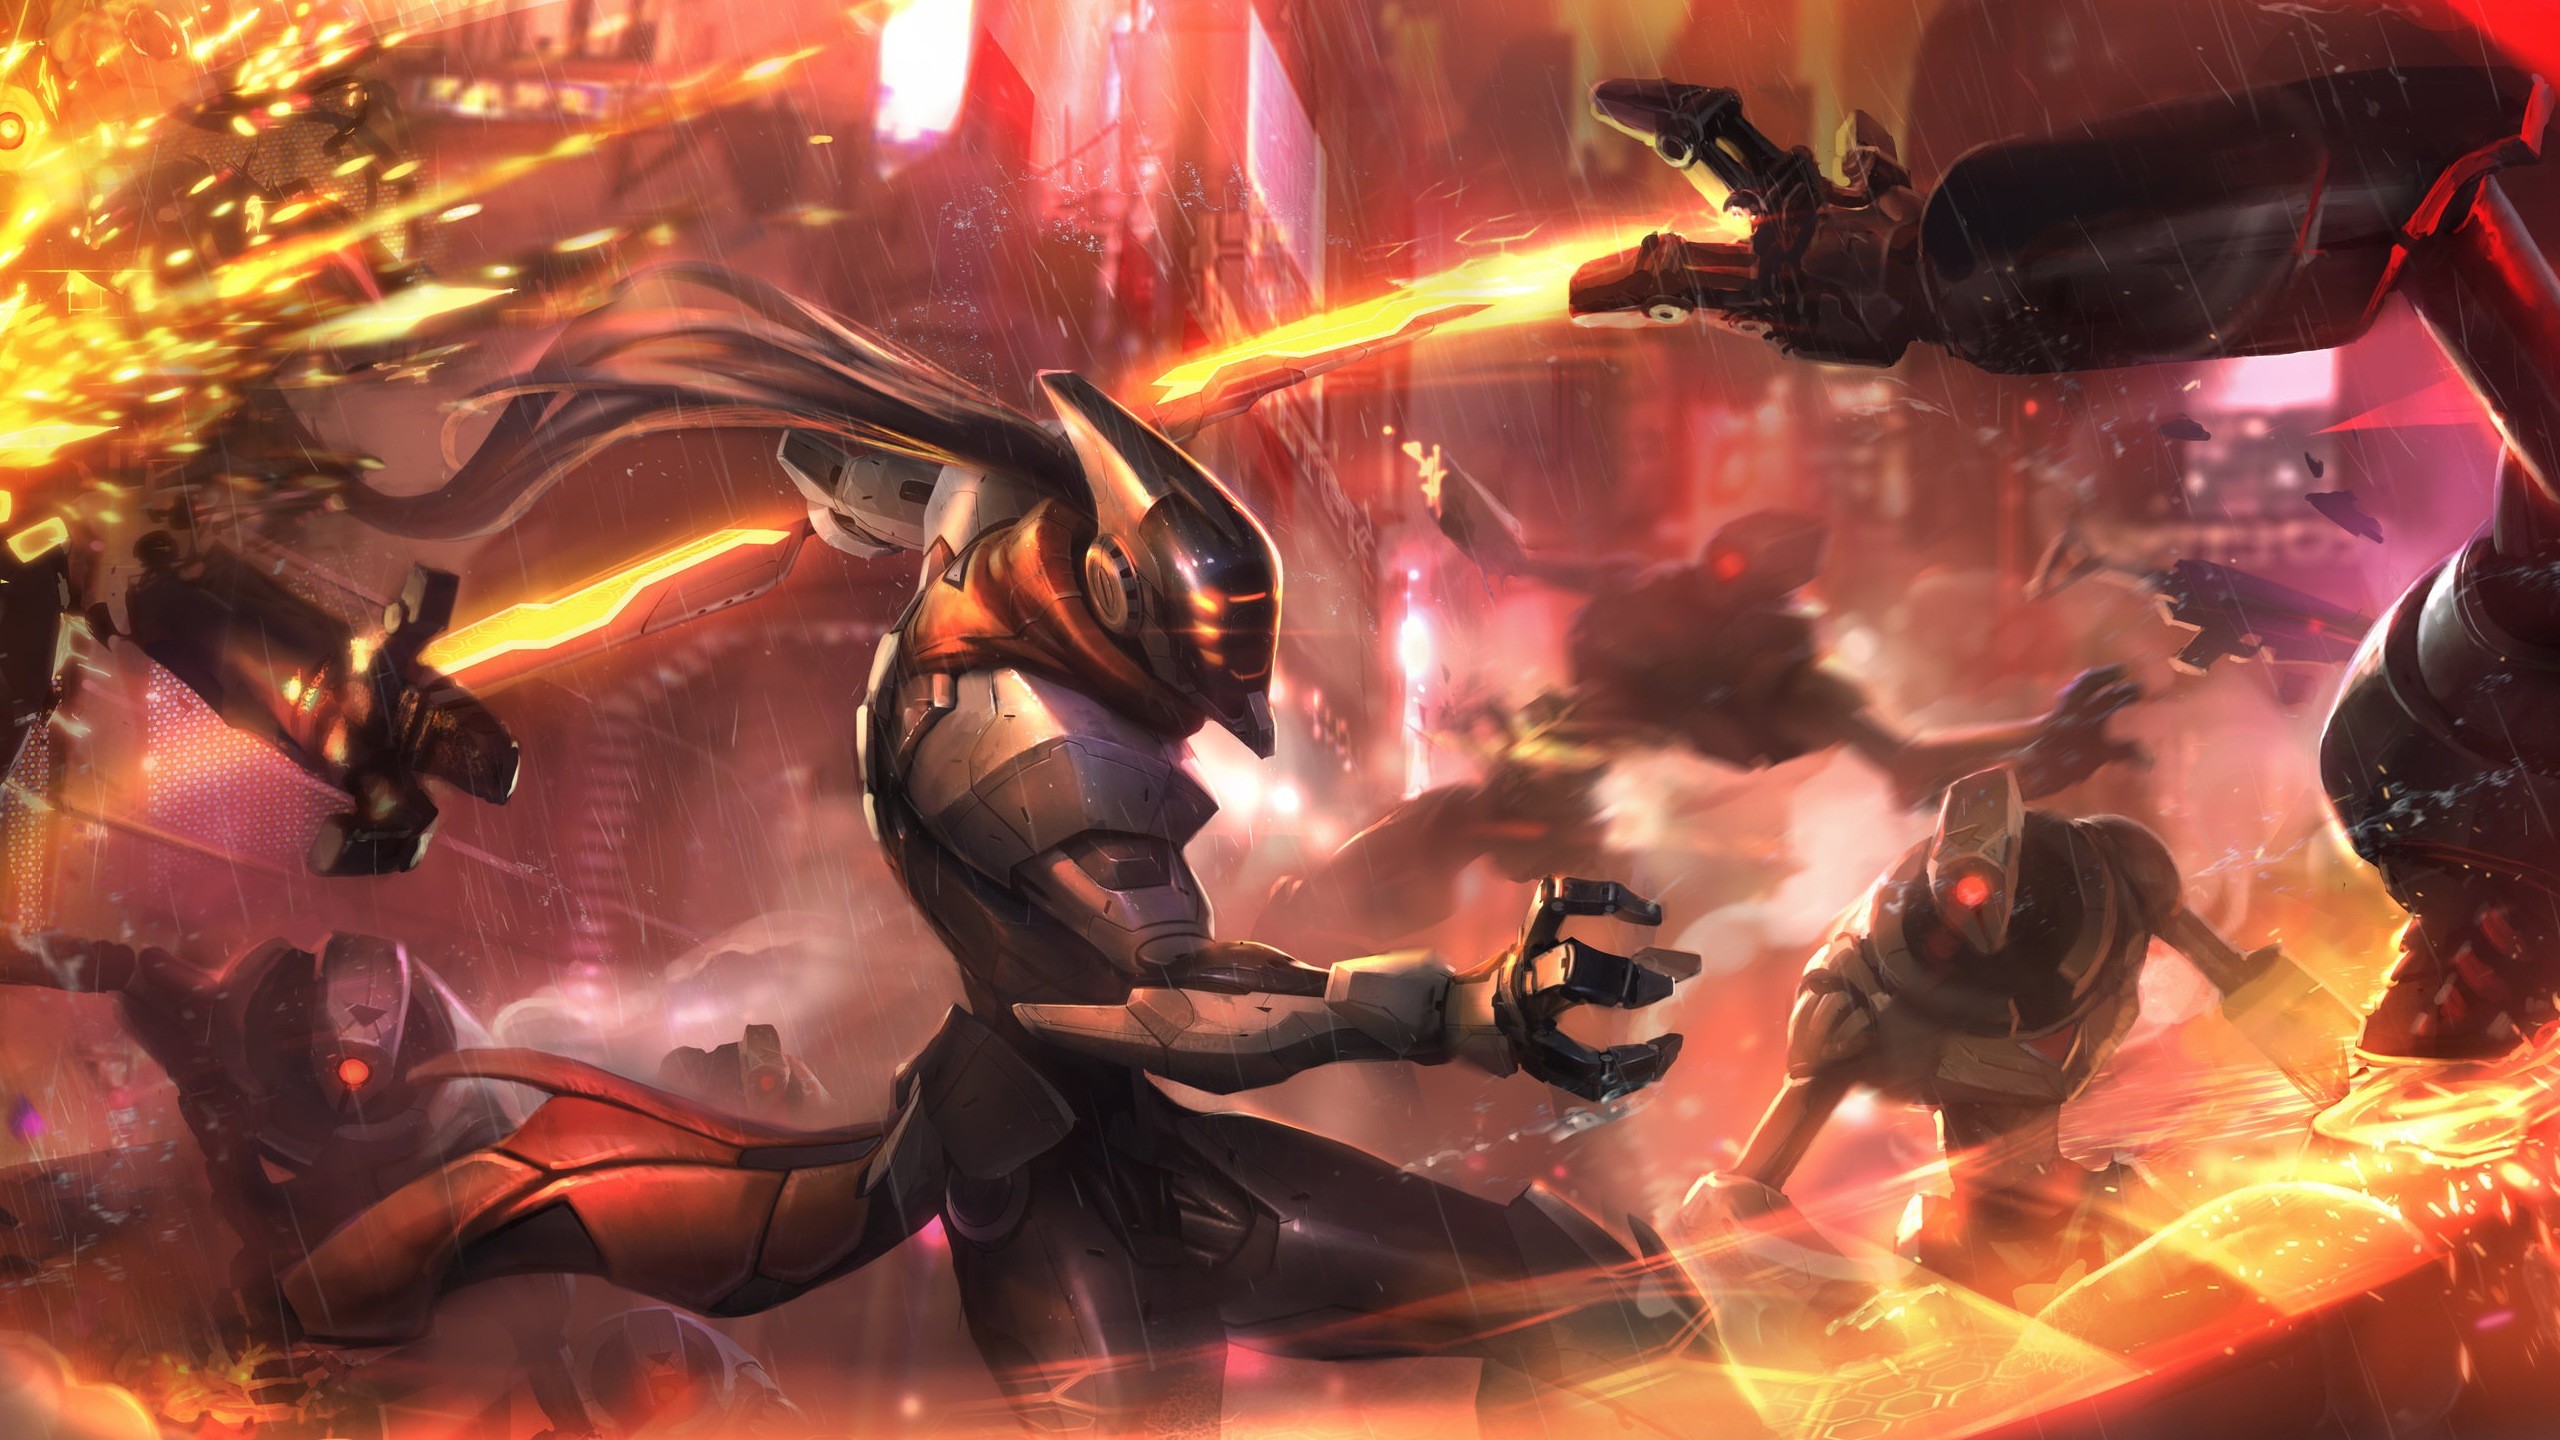 2560x1440 Download PROJECT Fiora Wallpaper Skin Art Fighting 1920x1080 | Places to  Visit | Pinterest | Skin art, Cosplay and Anime